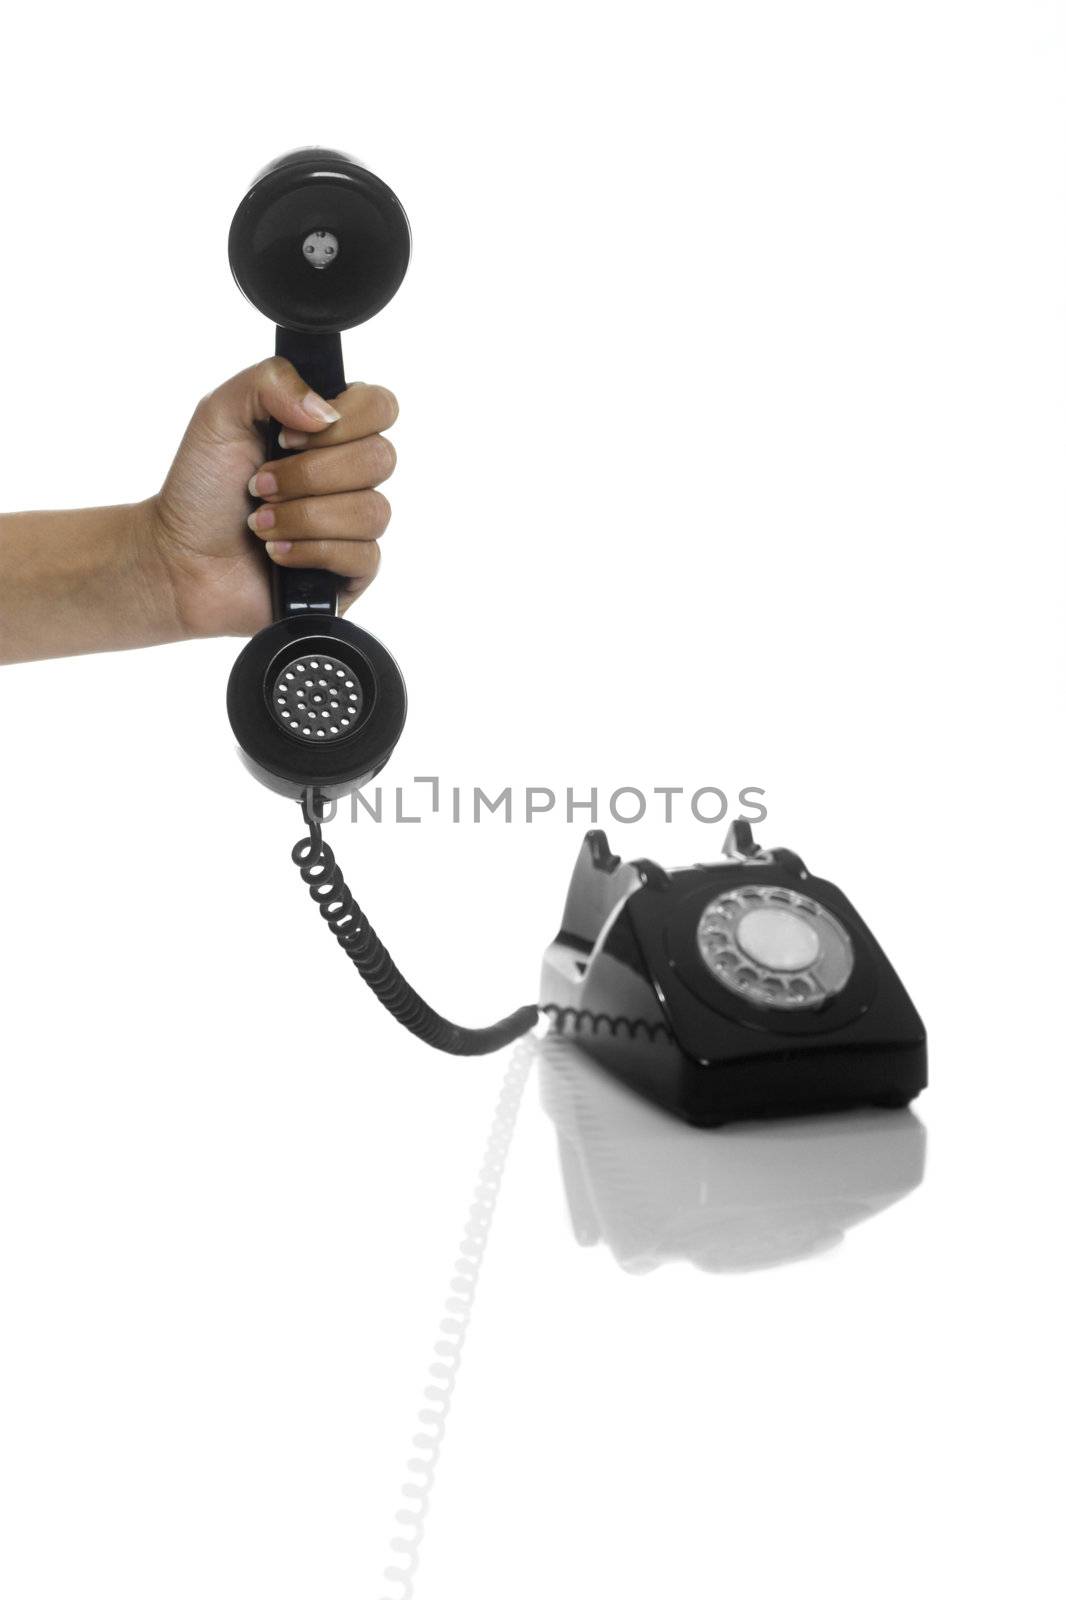 Male hand holding an hold vintage phone